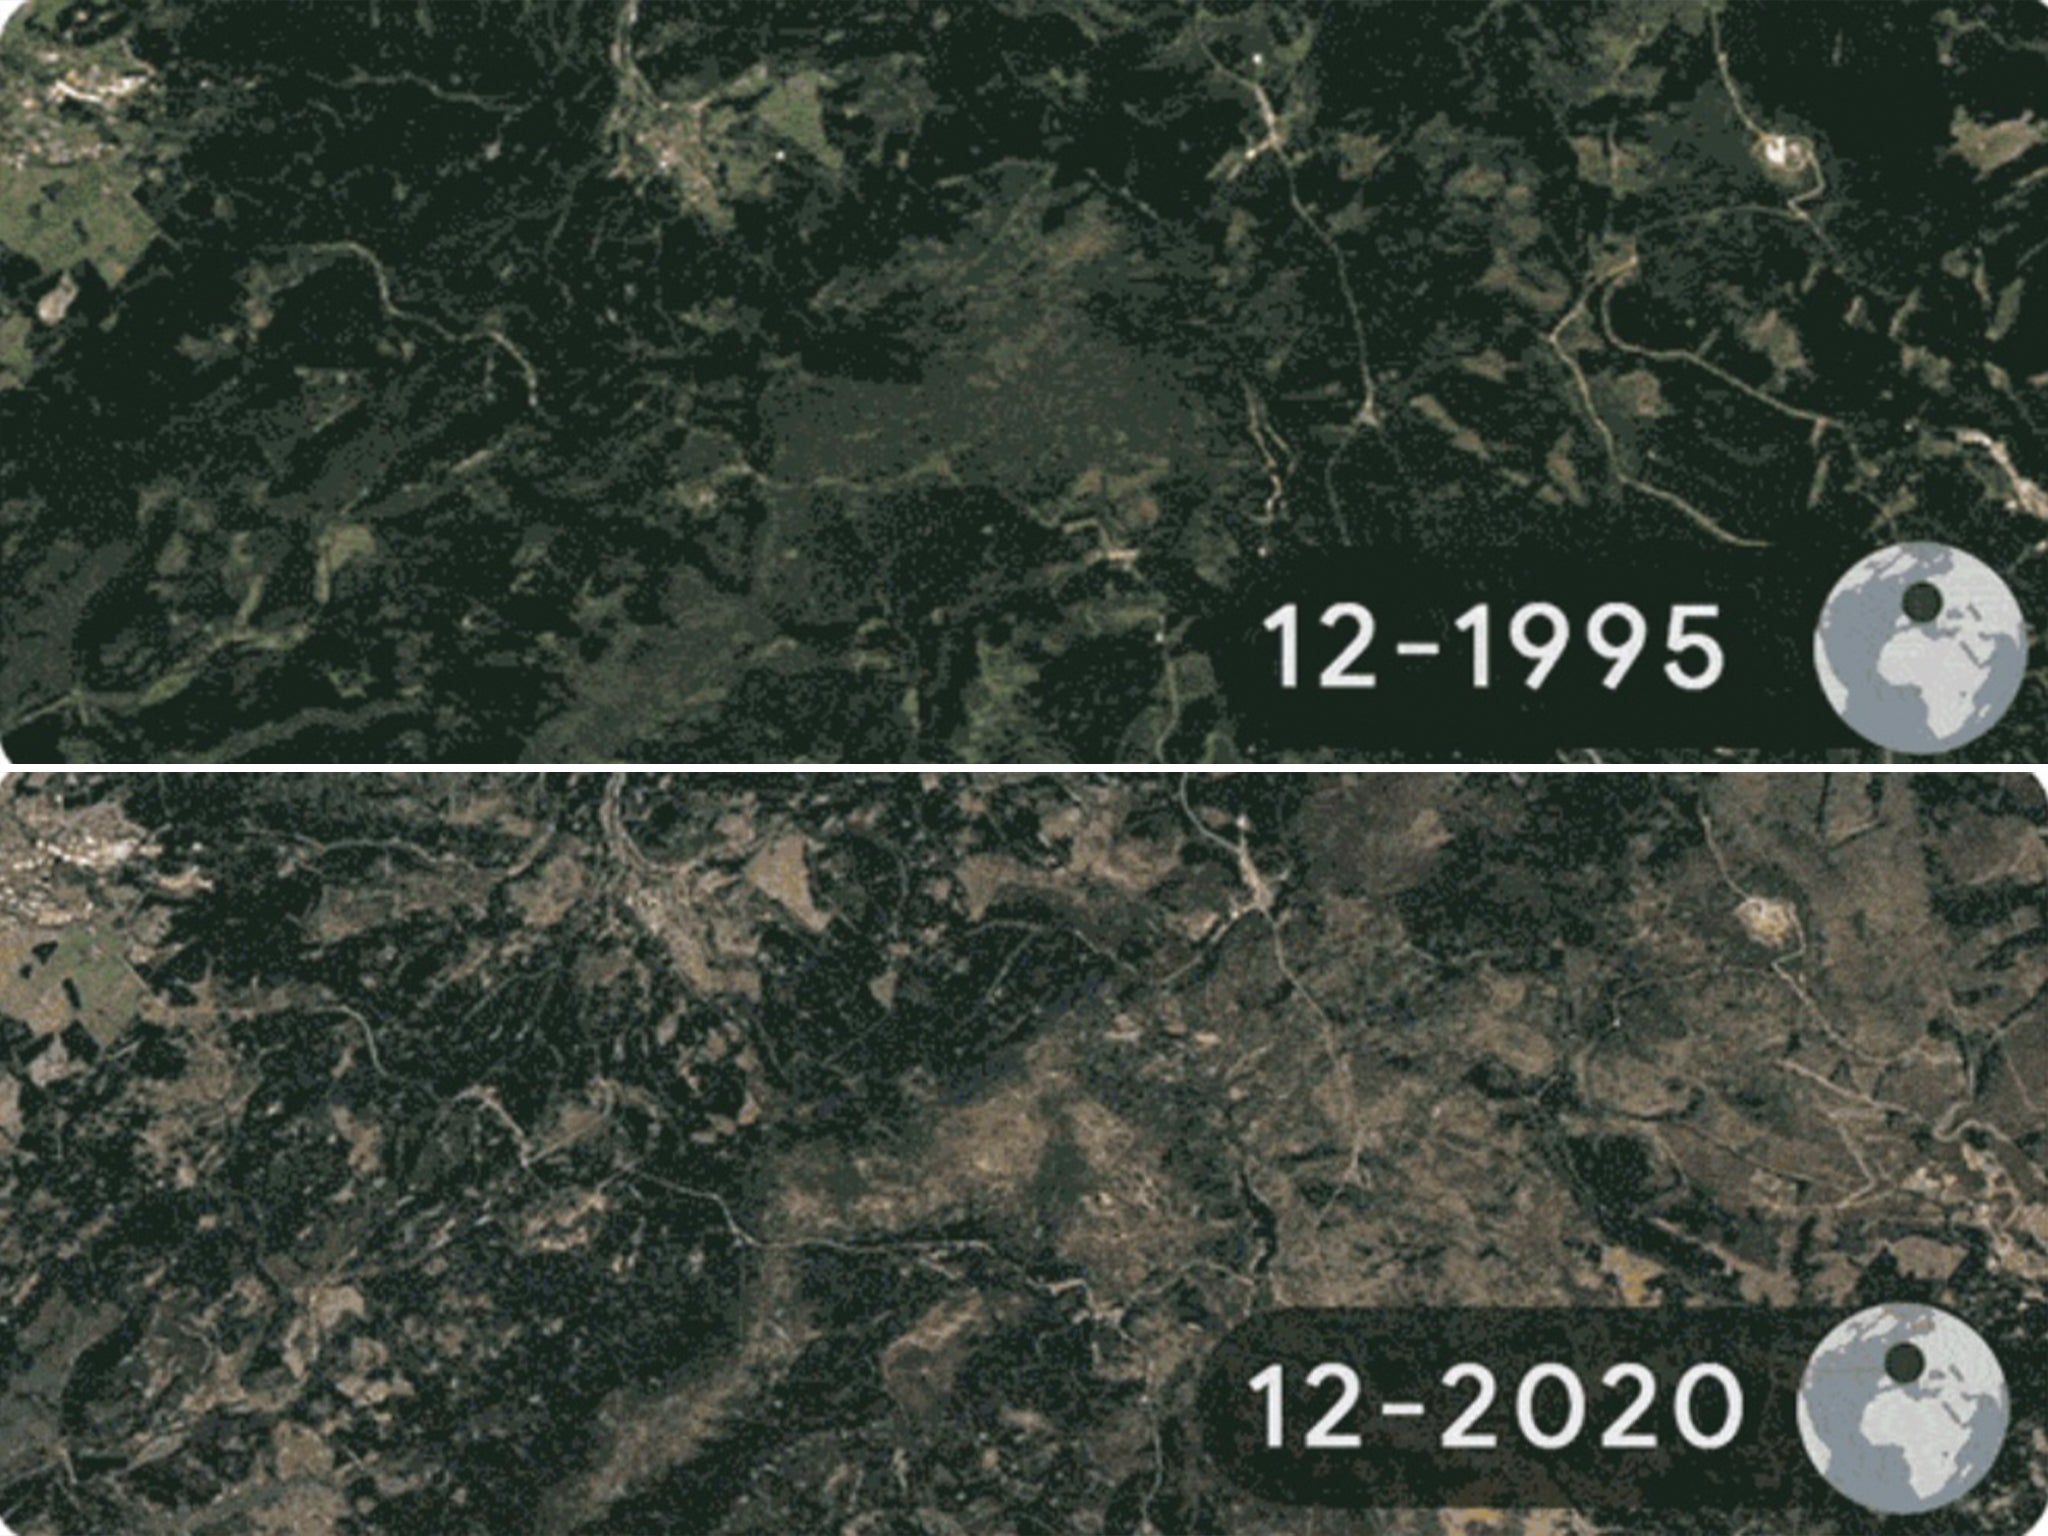 Images taken each December annually from 1995 to 2020 show deforestation in the Harz Forests in Elend, Germany